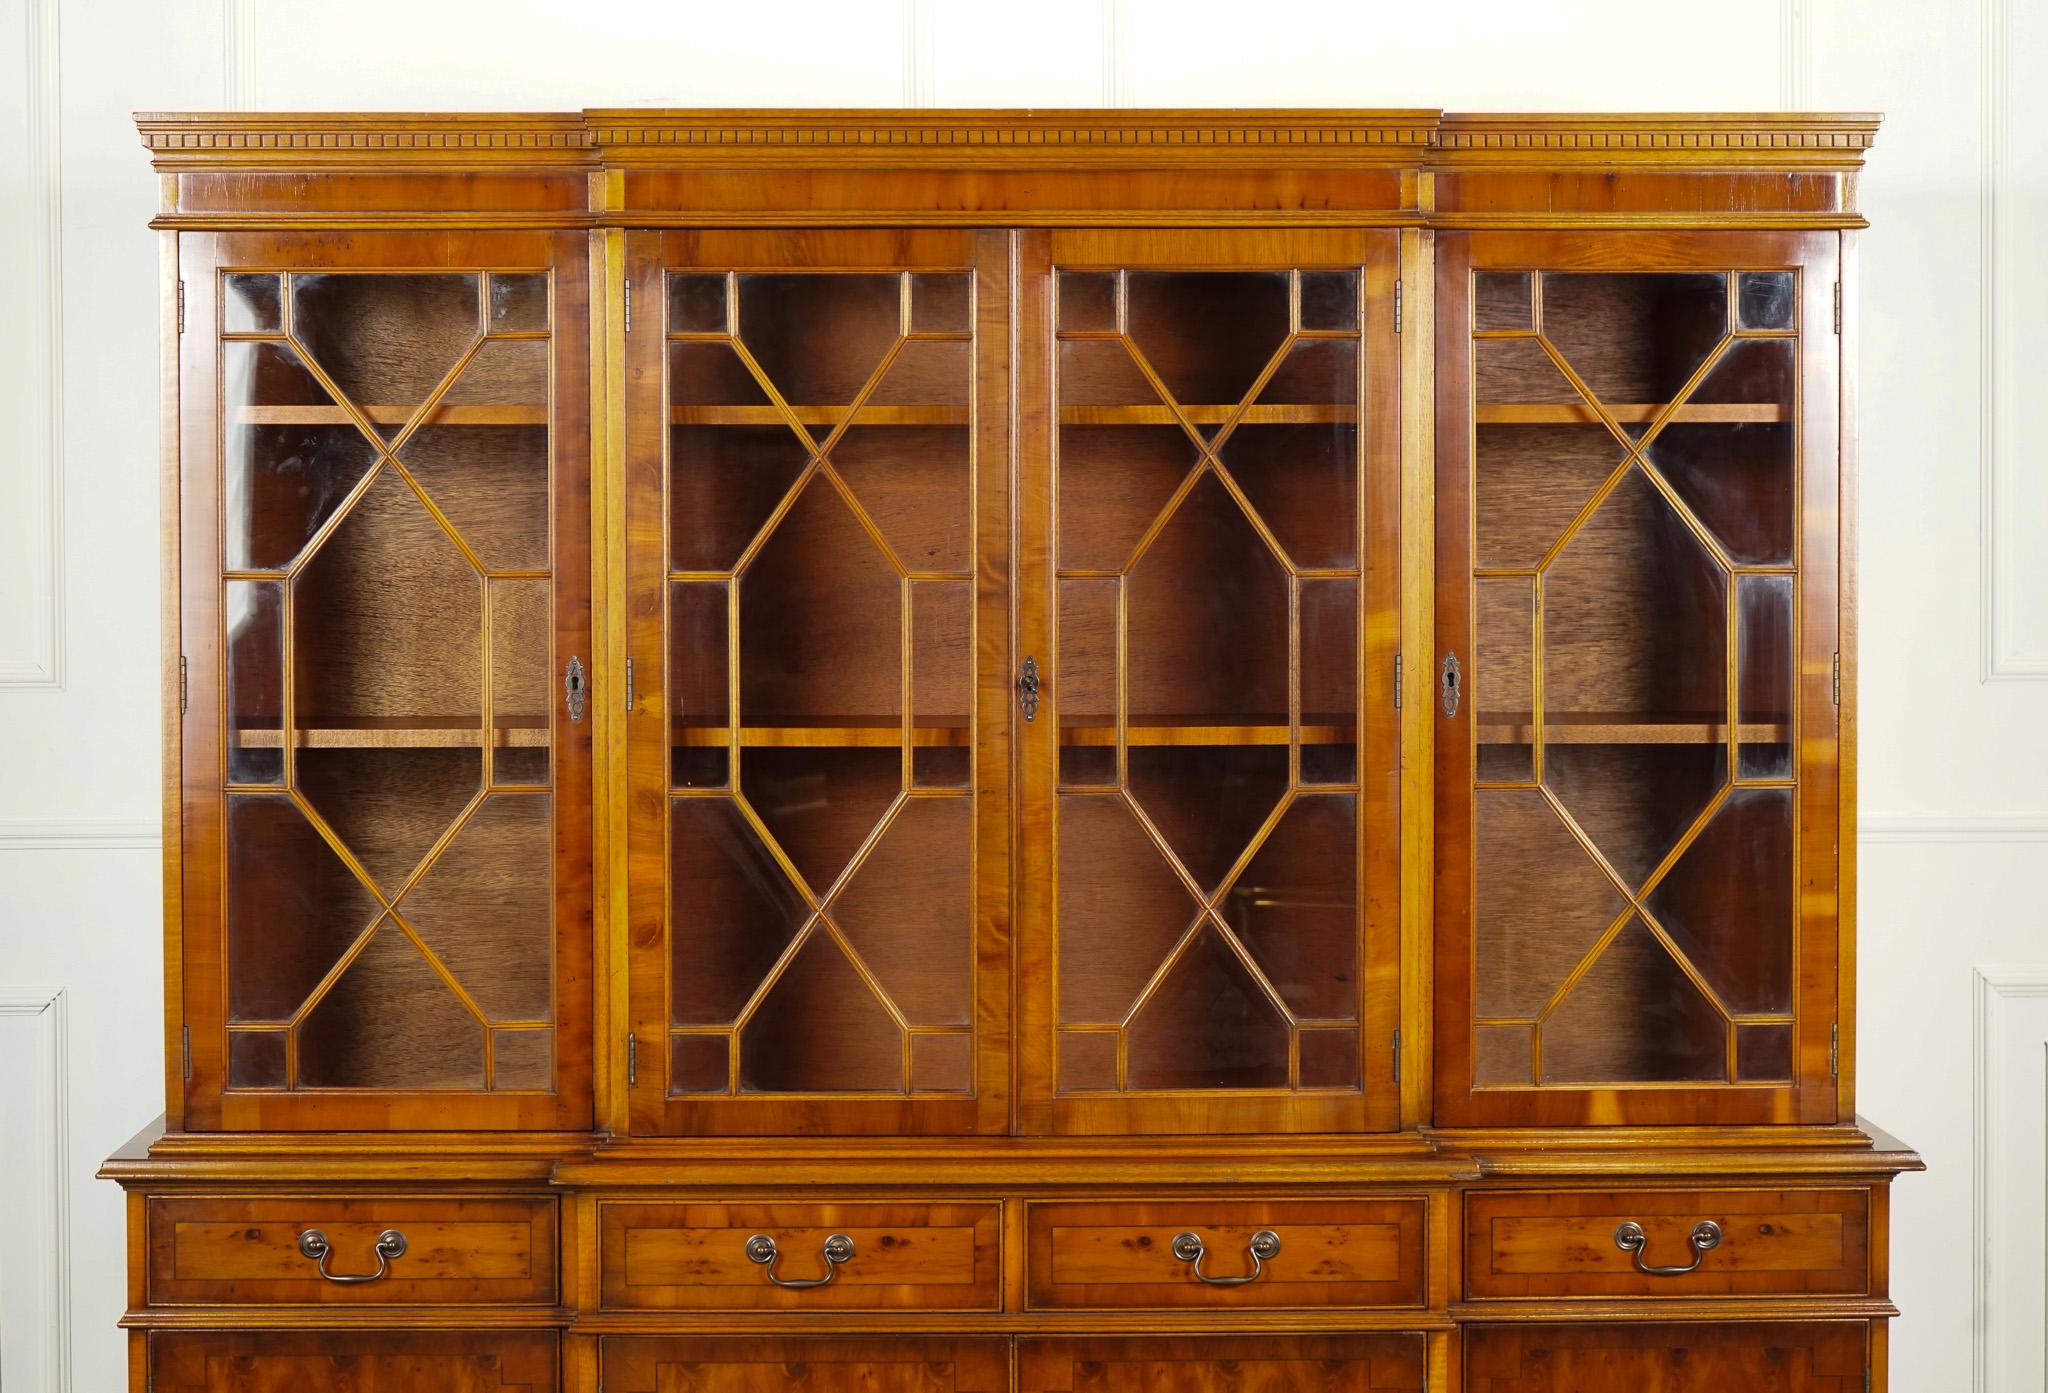 Hand-Crafted STUNNING VINTAGE BURR YEW WOOD DISPLAY CABiNET BOOKCASE BY CHARLES BARR J1 For Sale